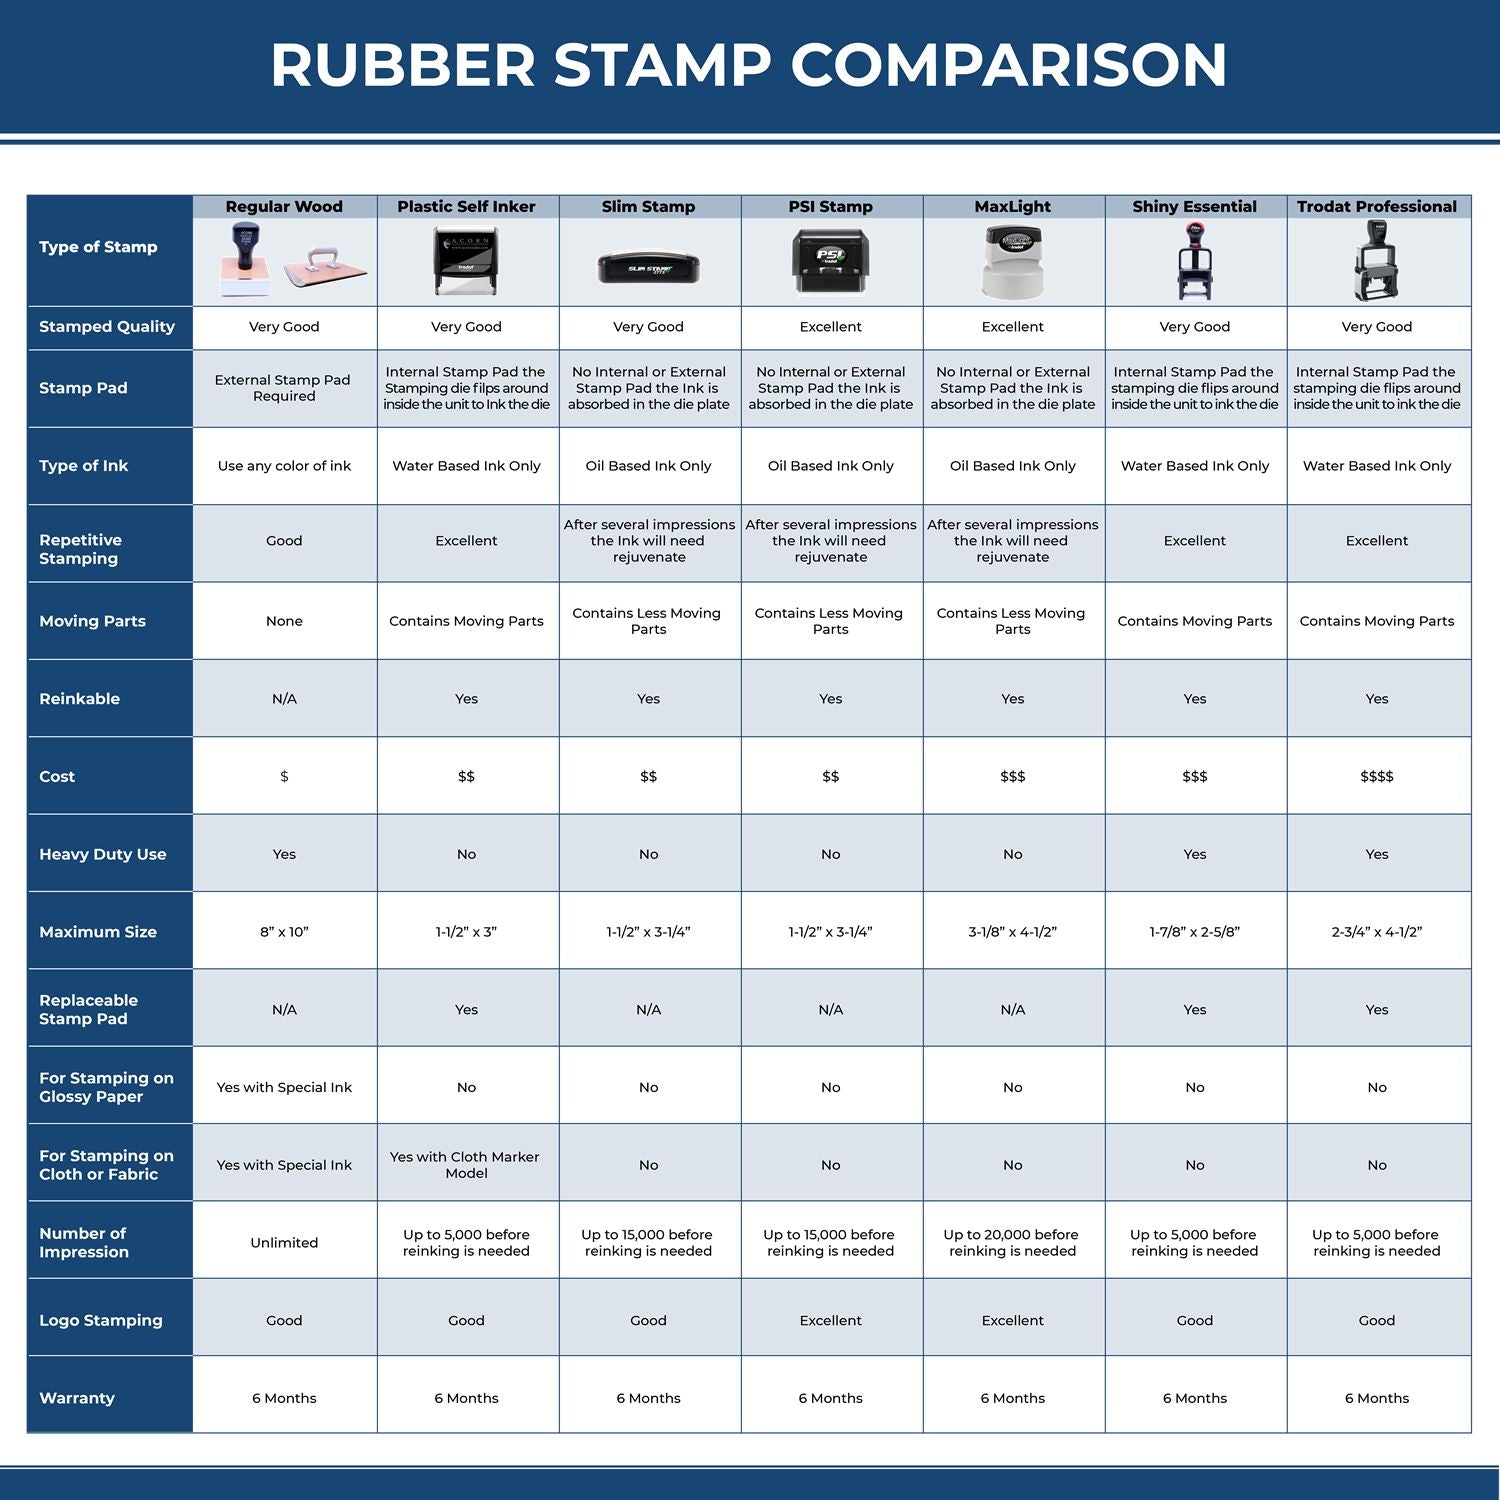 A comparison chart for the different types of mount models available for the Wooden Handle Mississippi State Seal Notary Public Stamp.